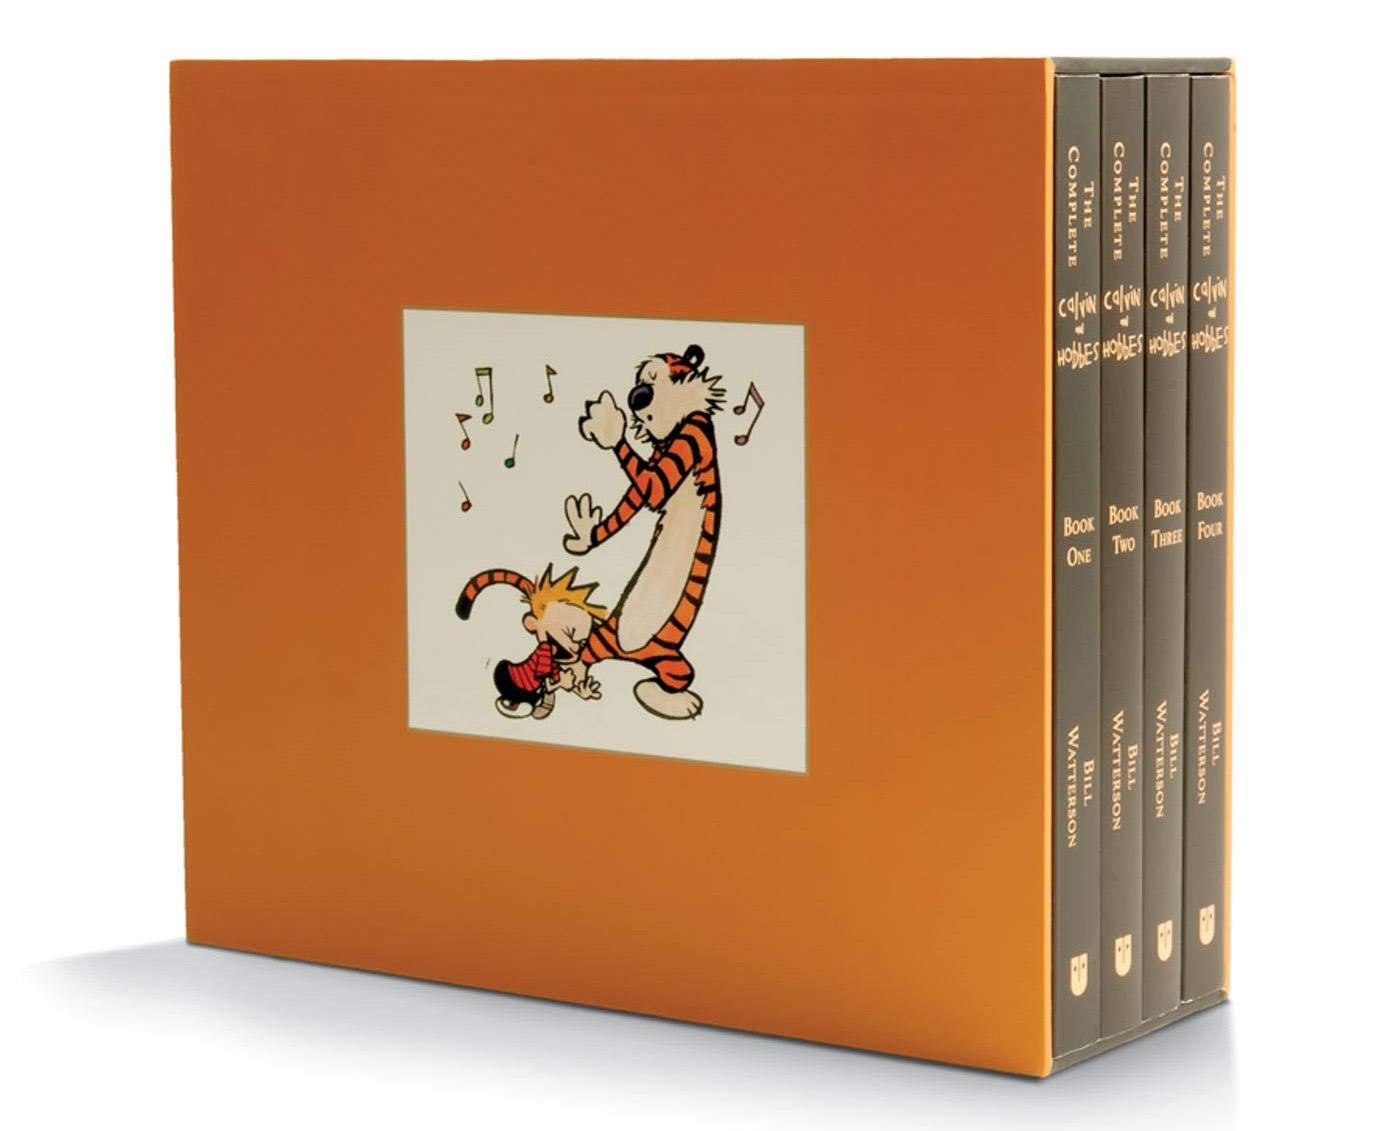 The Complete Calvin and Hobbes Paperback Book Box Set for $58.91 Shipped